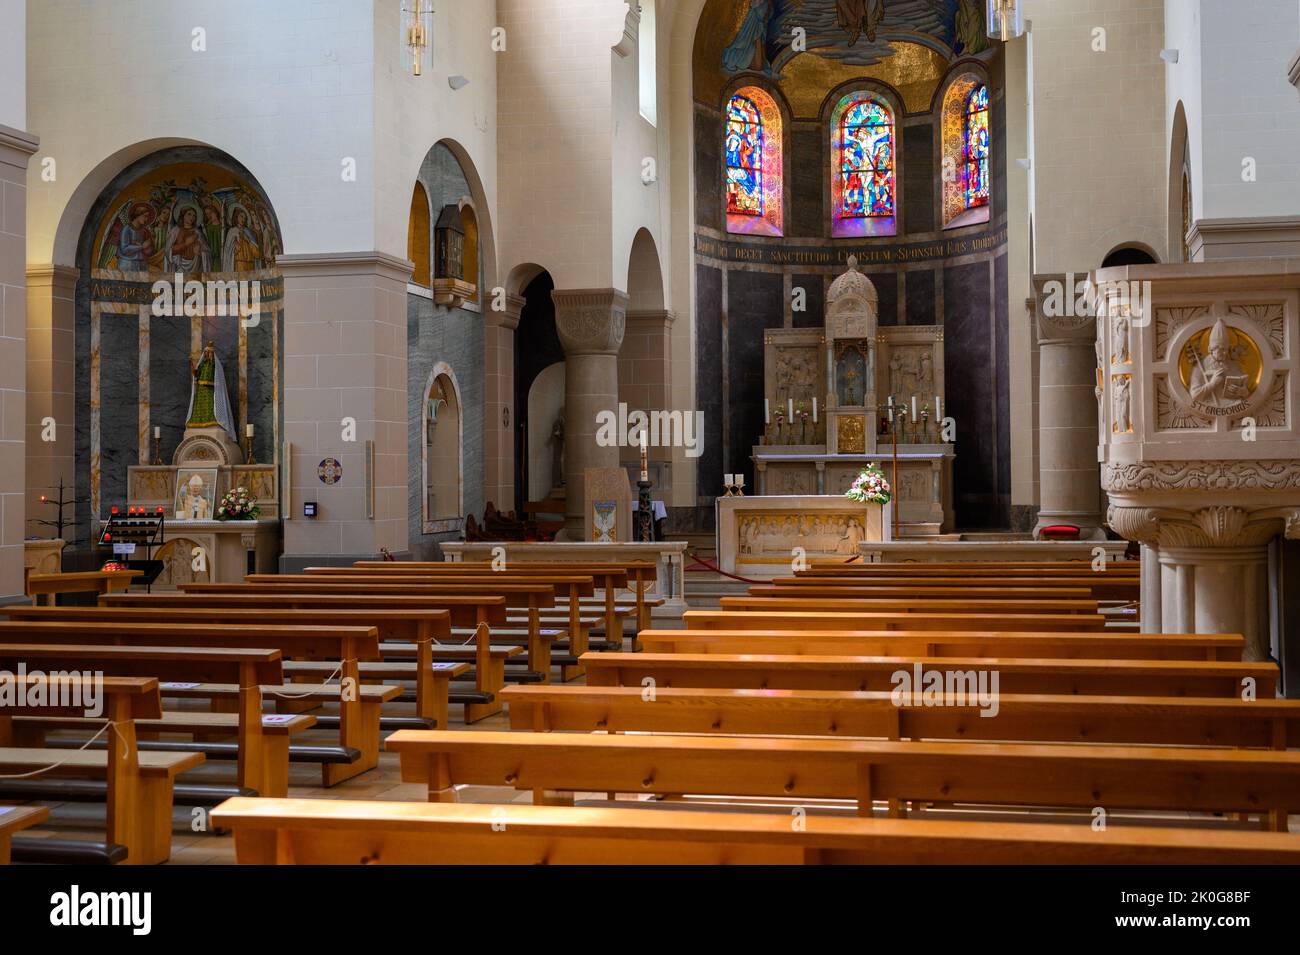 The Church of Saints Cosmas & Damian in Clervaux, Luxembourg. Stock Photo